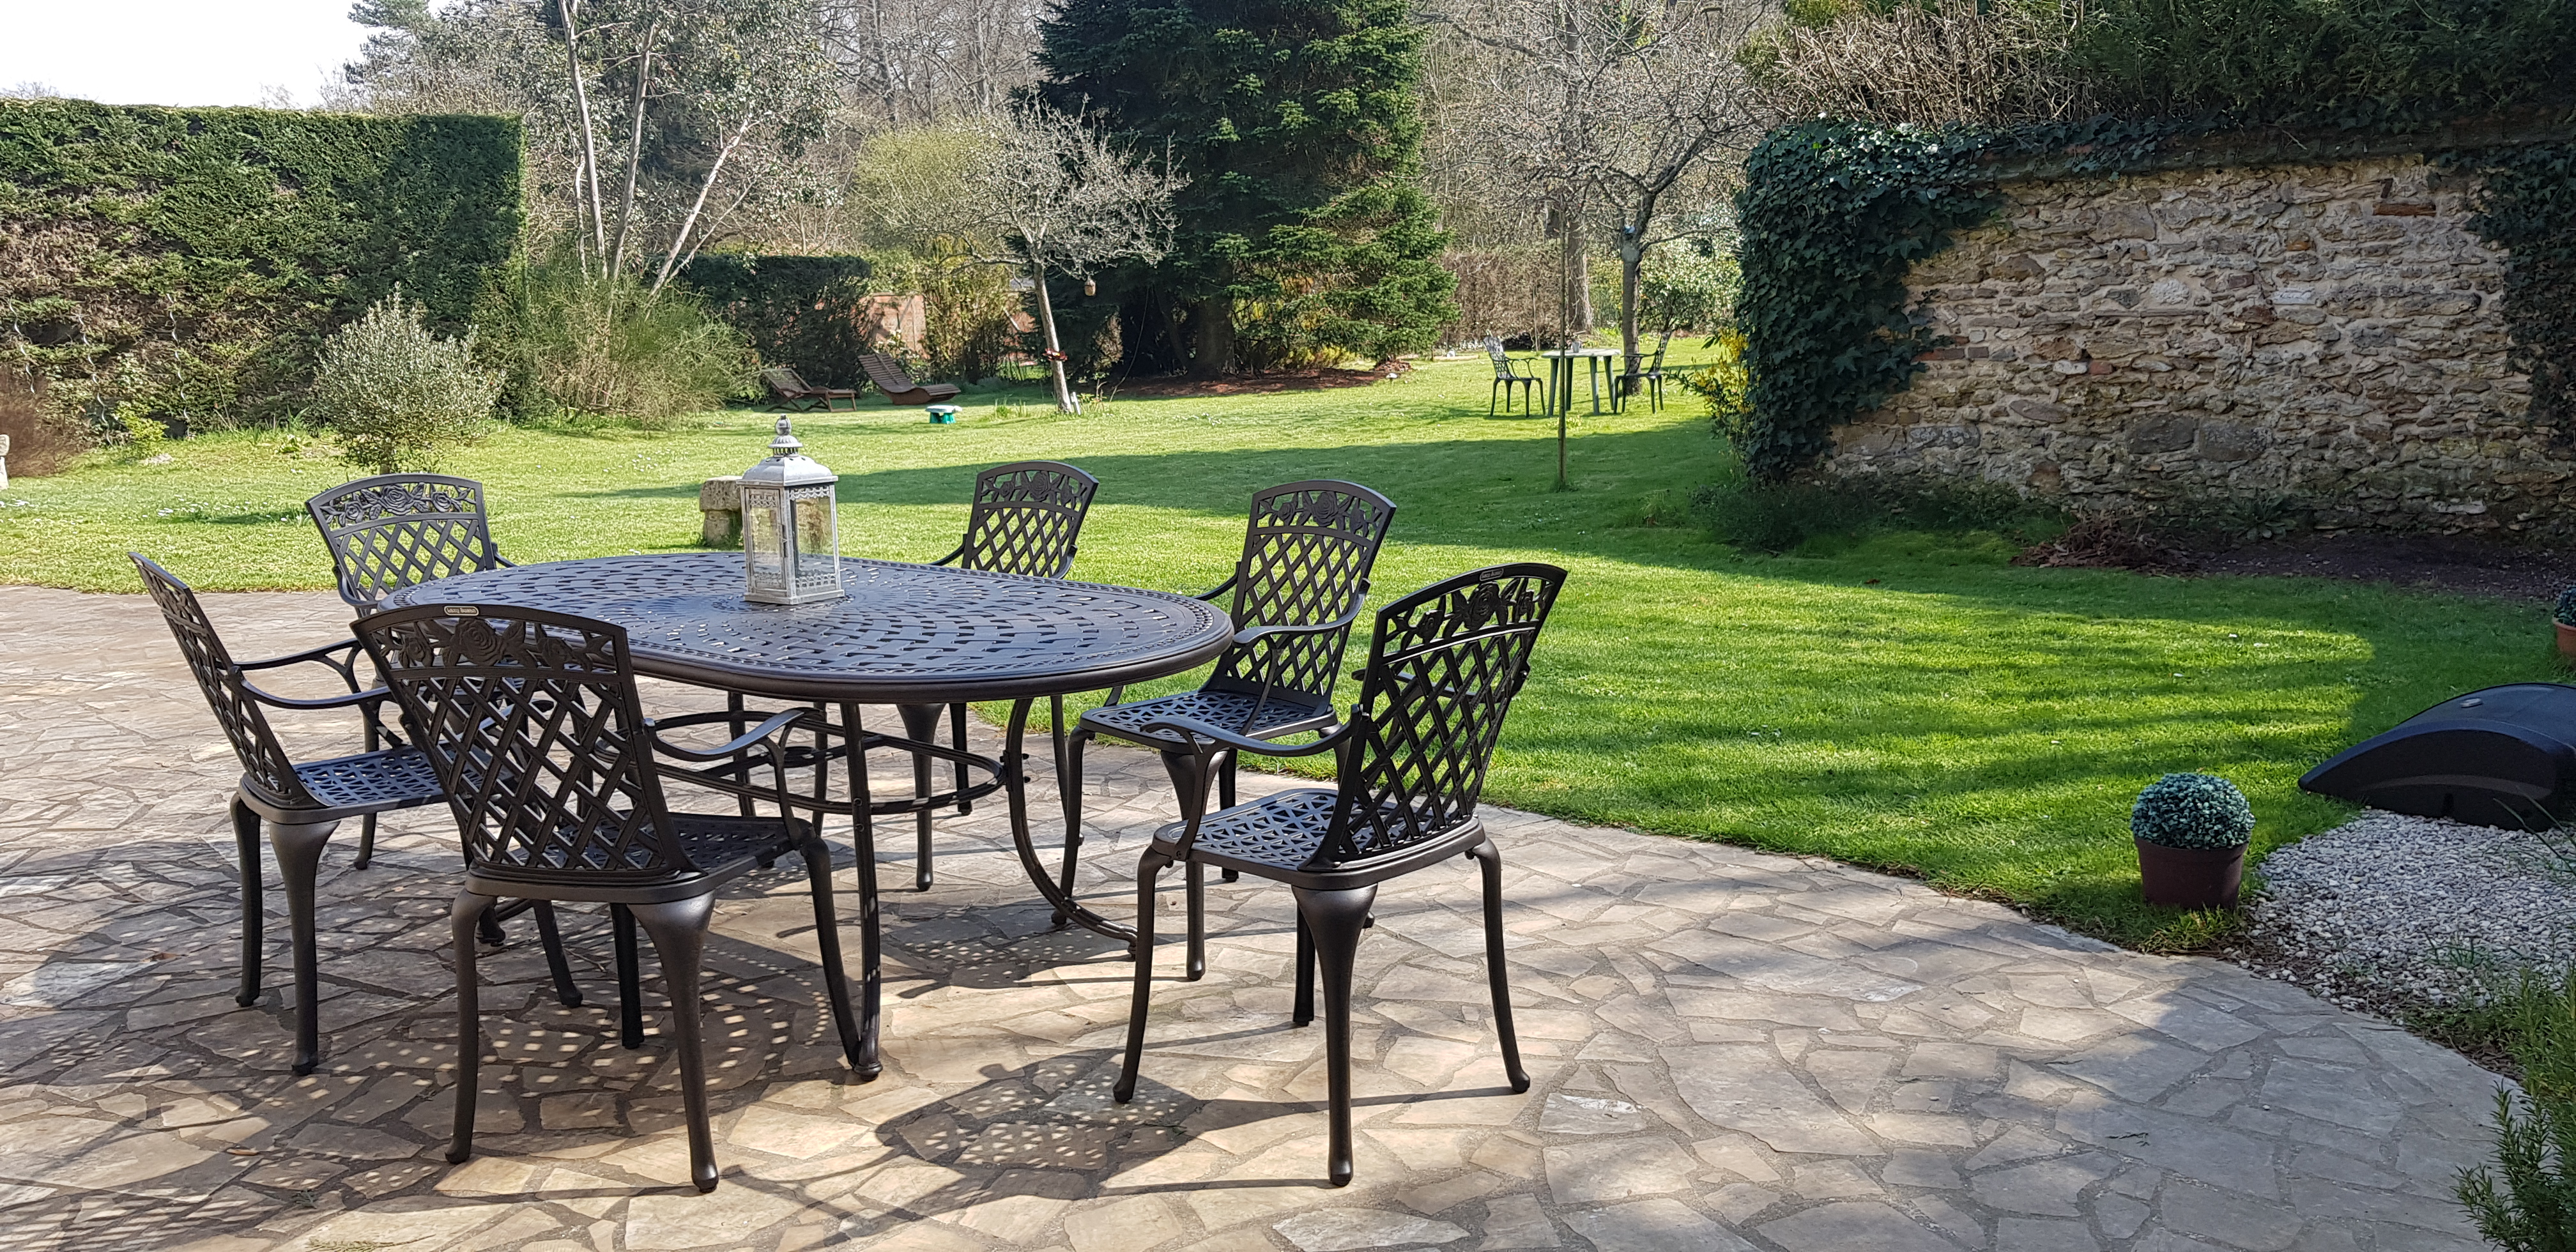 Garden Table Centrepiece | Work with your patio and keep it simple 